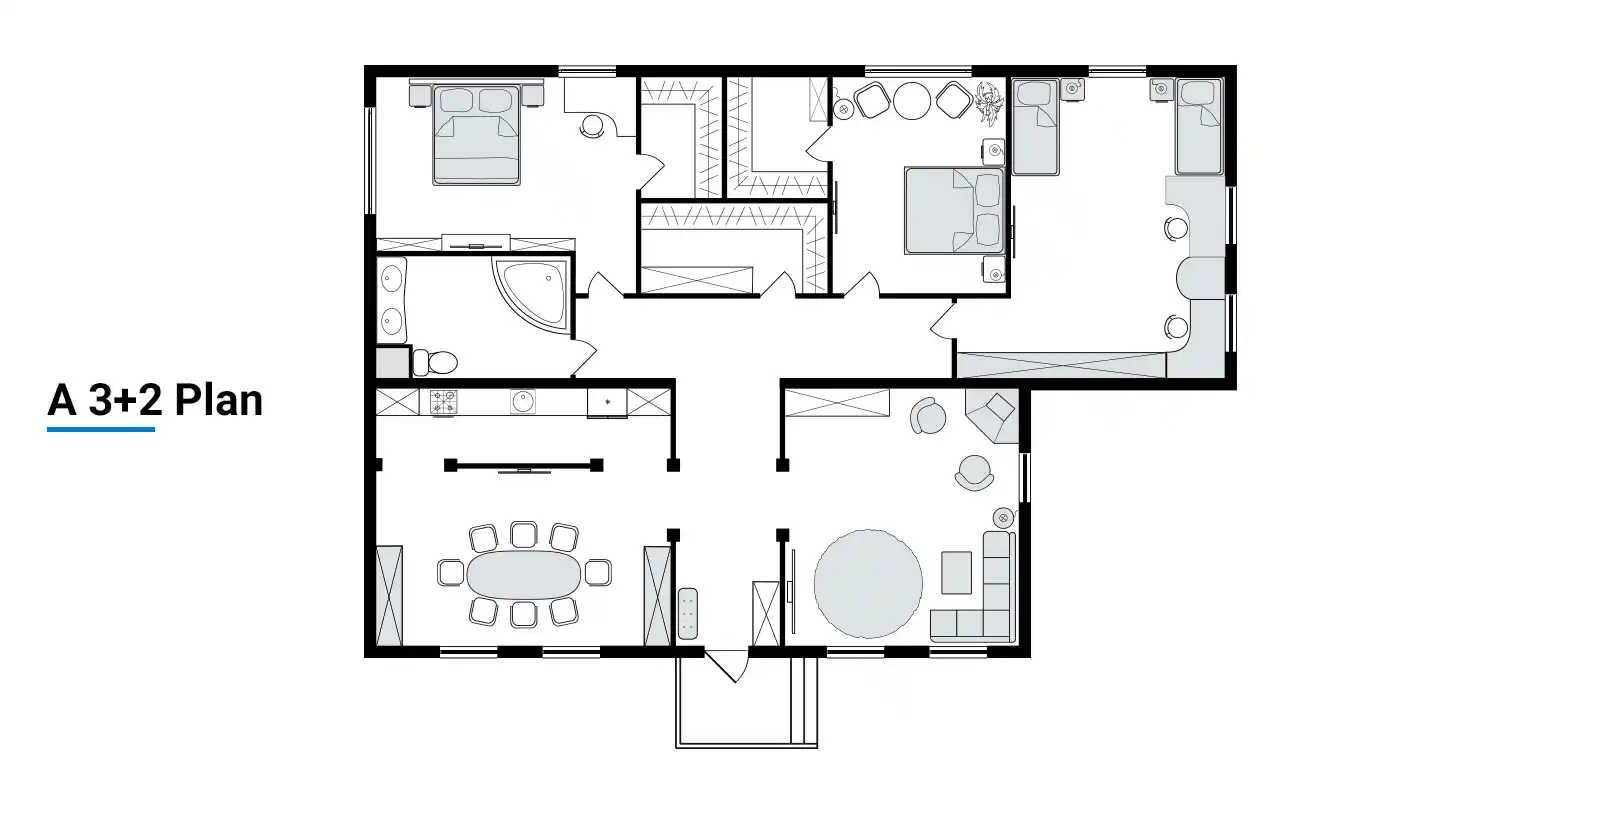 What is 3+2 apartment in turkey? A plan of 3+2 home in Turkey with 3 bedrooms and 2 halls.